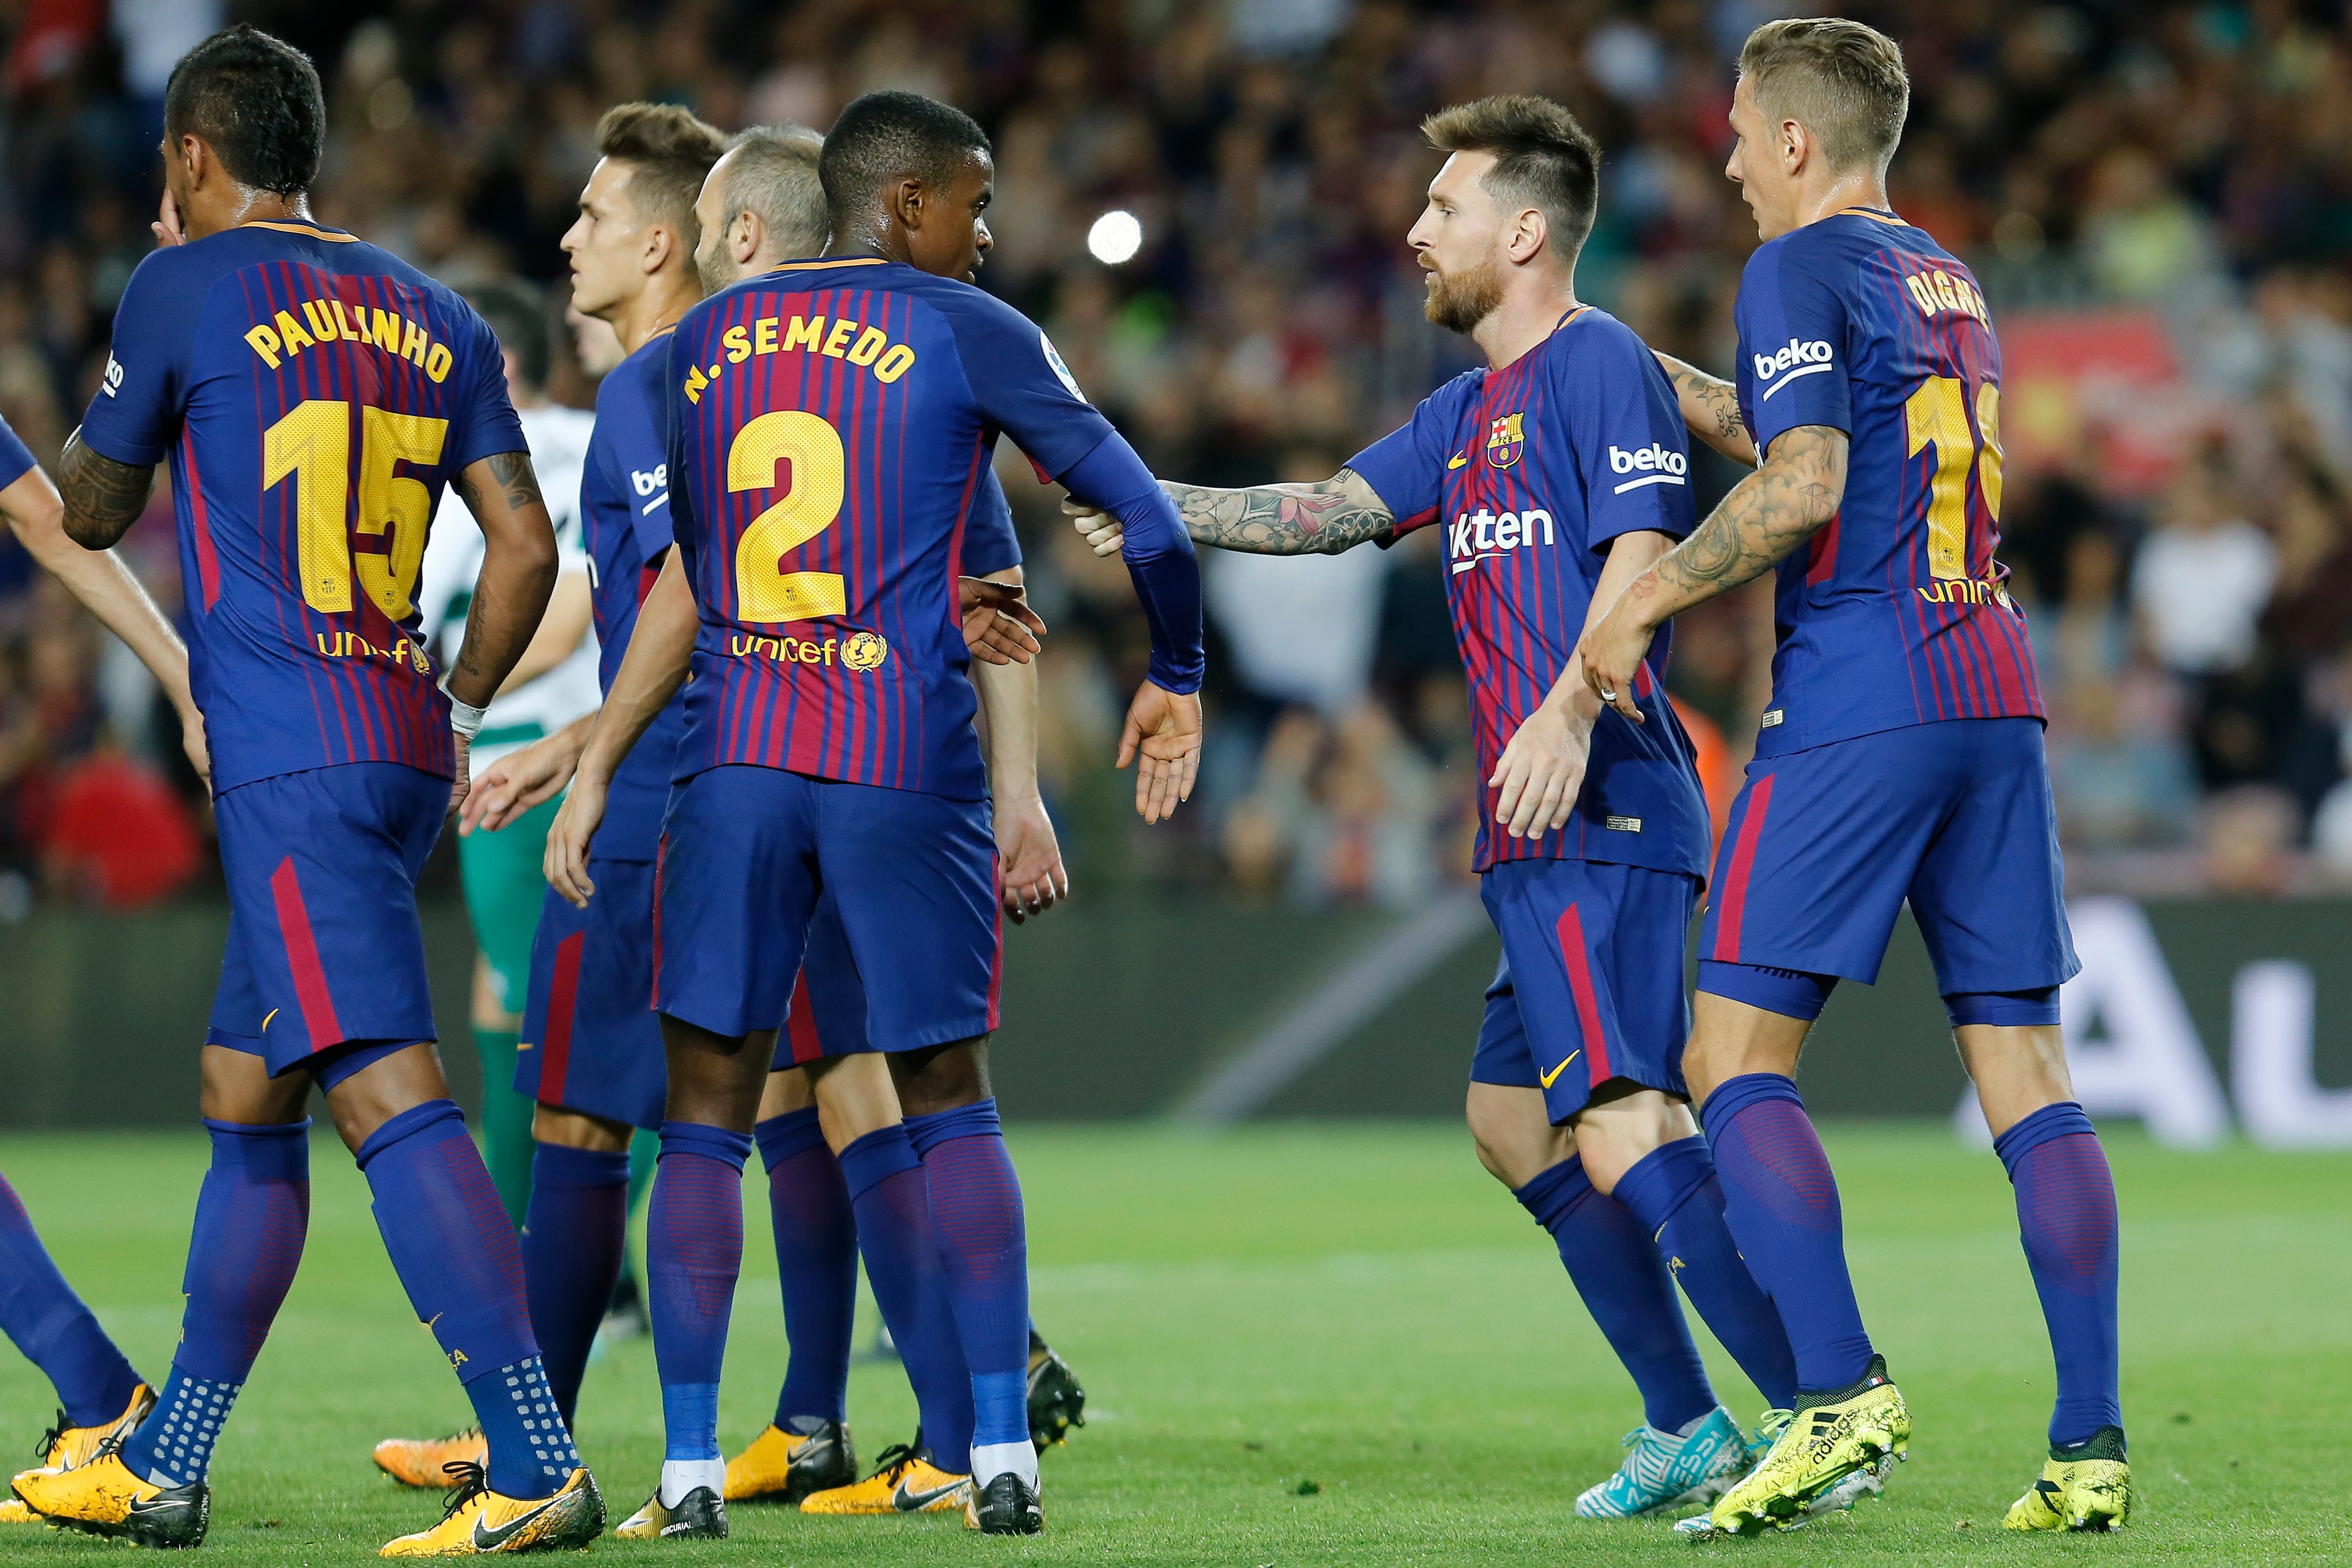 Barcelona's forward from Argentina Lionel Messi (2R) celebrates teammates after scoring during the Spanish league football match FC Barcelona against SD Eibar at the Camp Nou stadium in Barcelona on September 19, 2017. / AFP PHOTO / PAU BARRENA        (Photo credit should read PAU BARRENA/AFP/Getty Images)